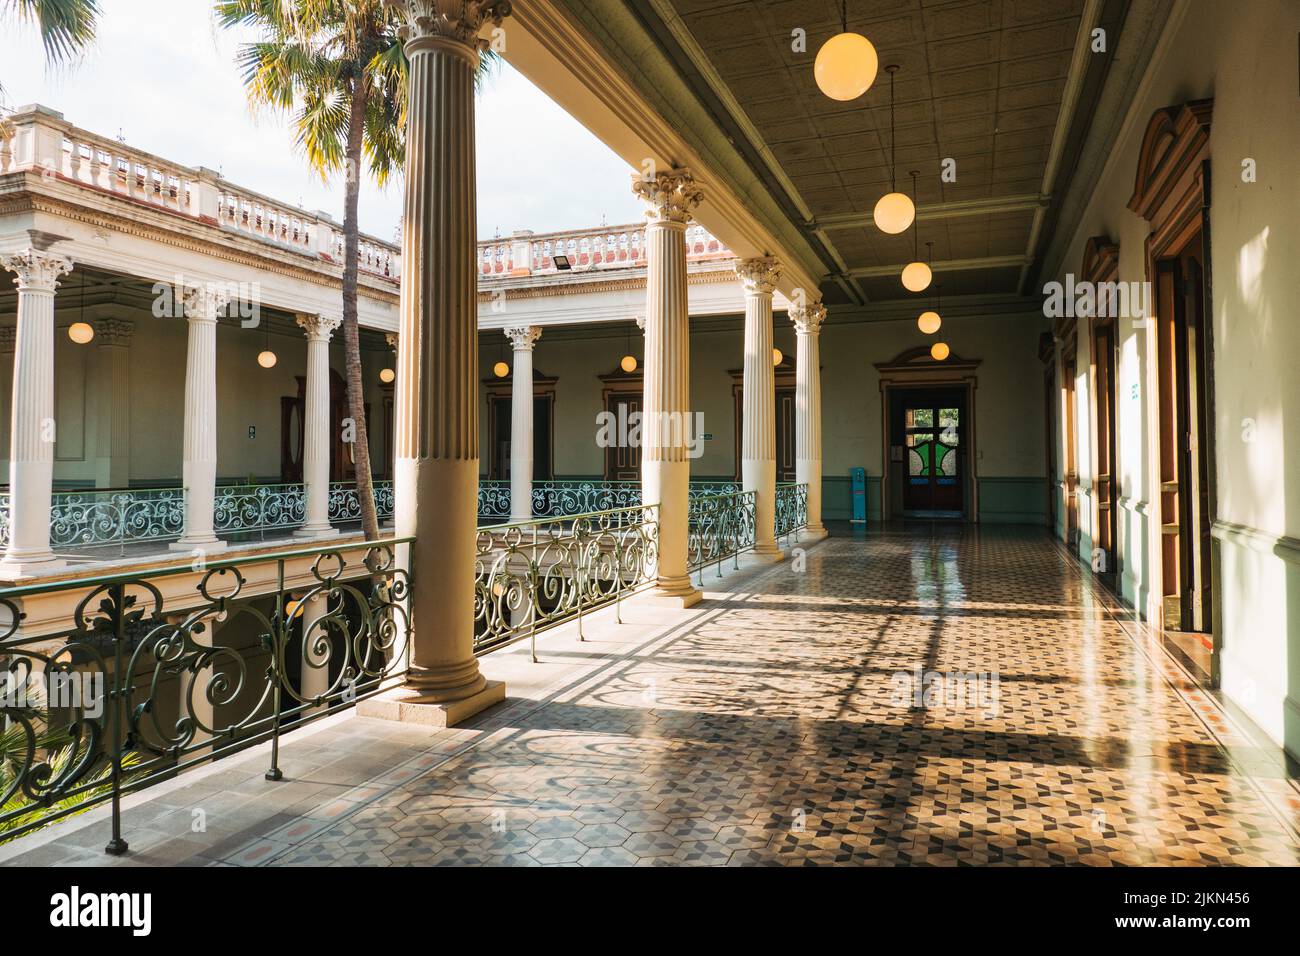 Interior of the historic National Palace of El Salvador, completed in 1911, the former site of the country's parliament, now a public space and museum Stock Photo